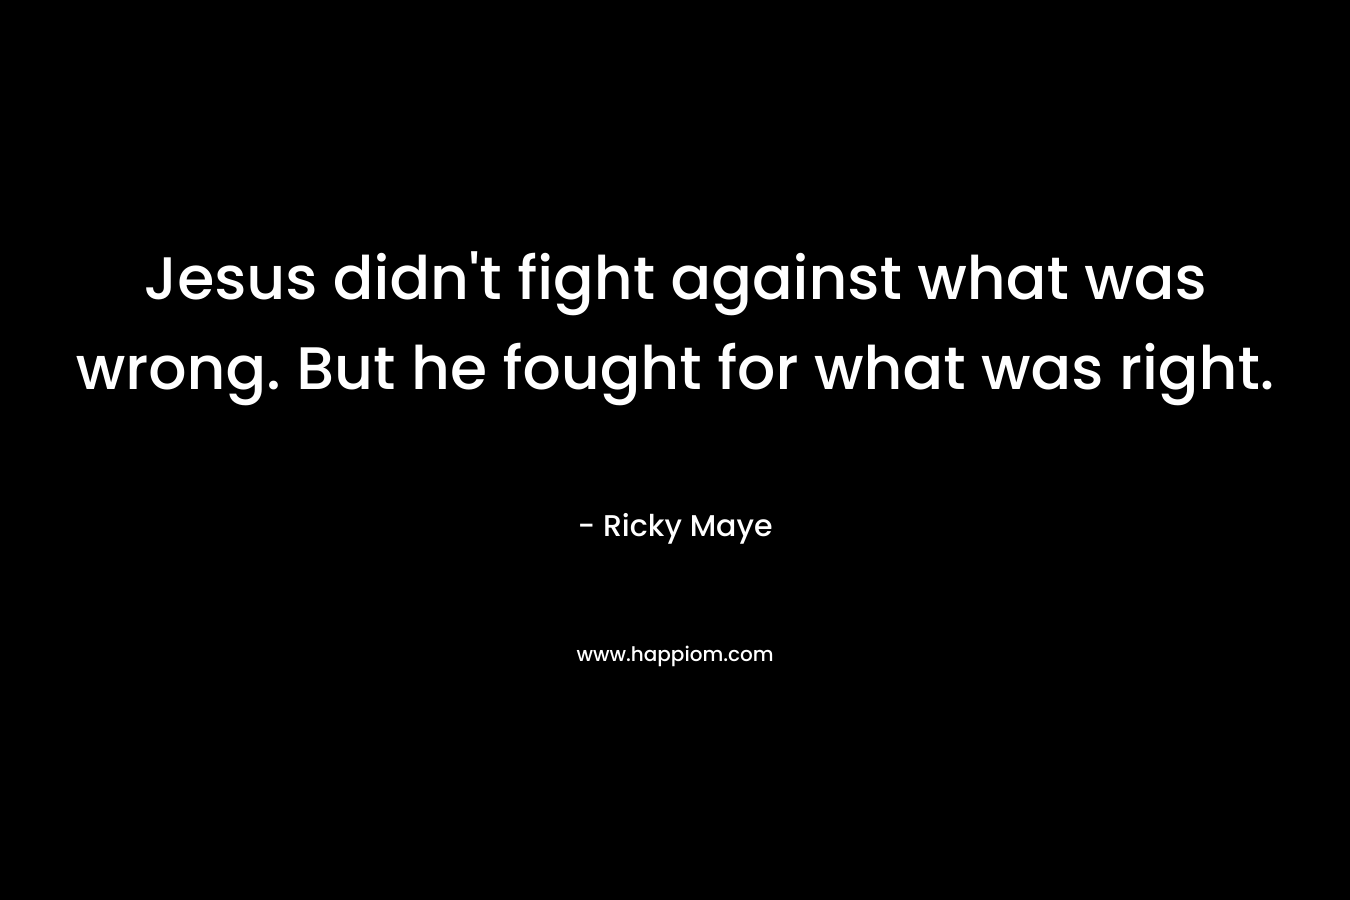 Jesus didn’t fight against what was wrong. But he fought for what was right. – Ricky Maye